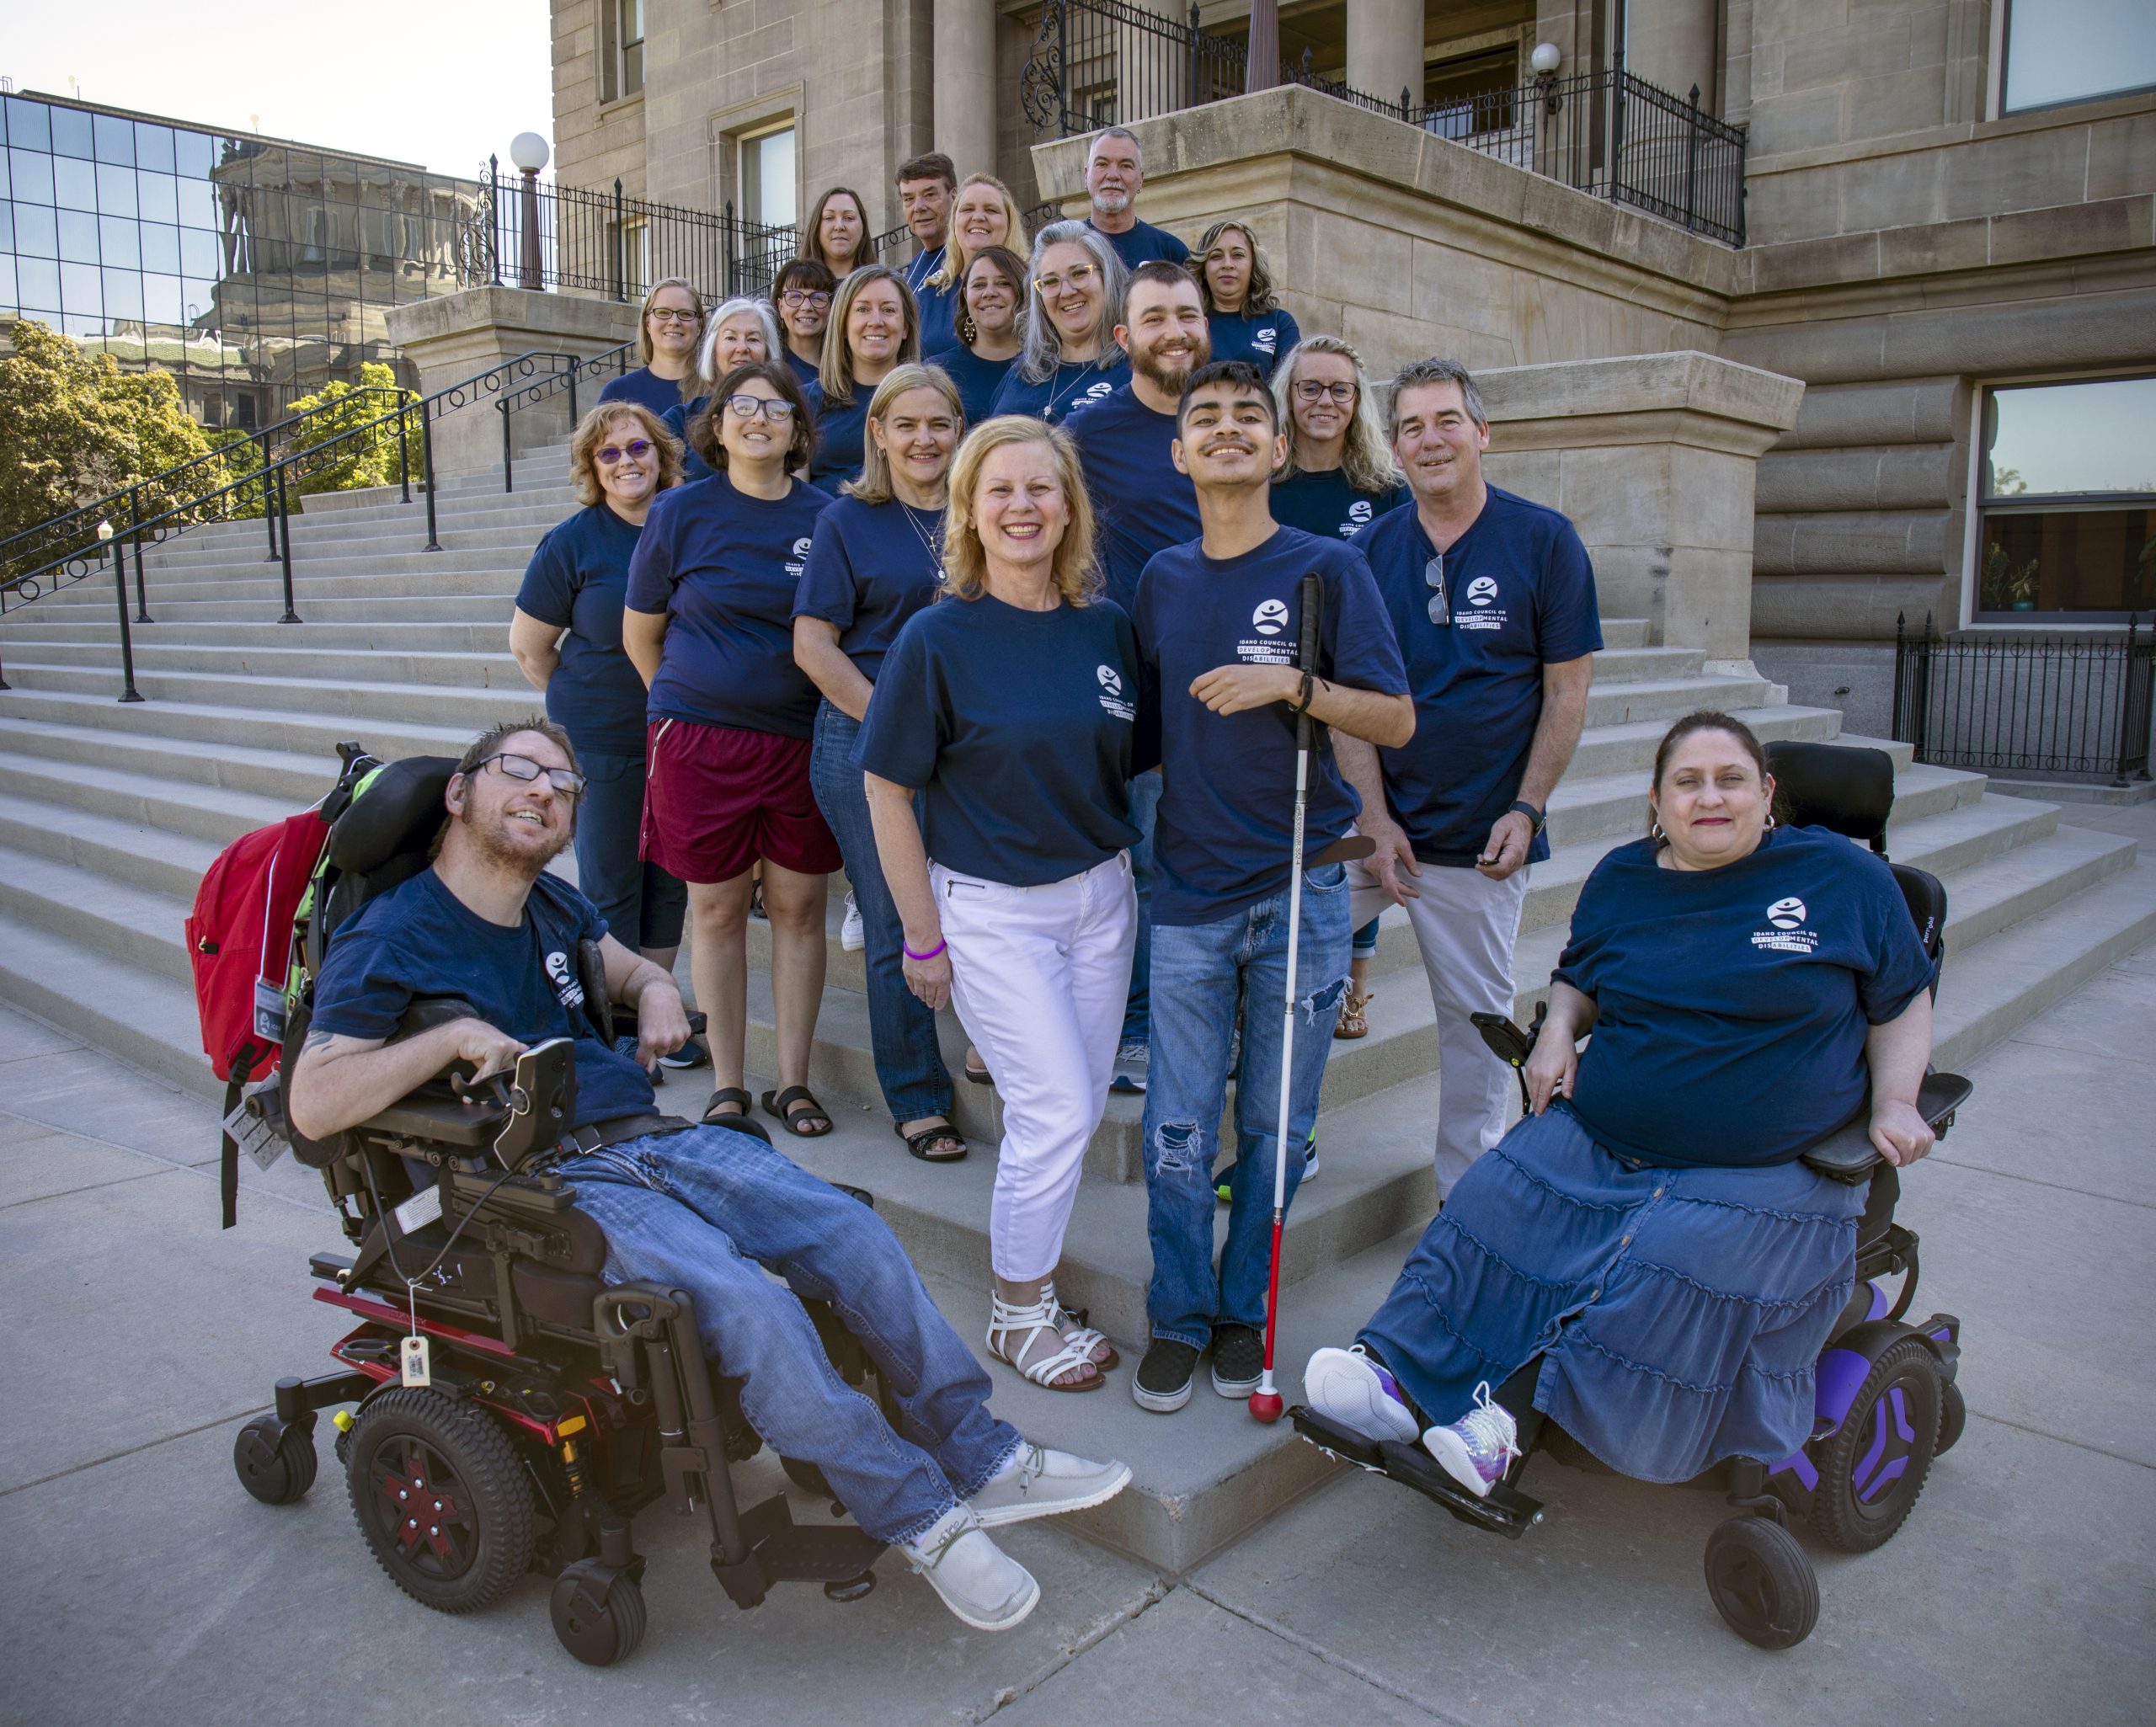 Idaho Council members wearing navy tshirts smiling in front of west stairs of capitol building